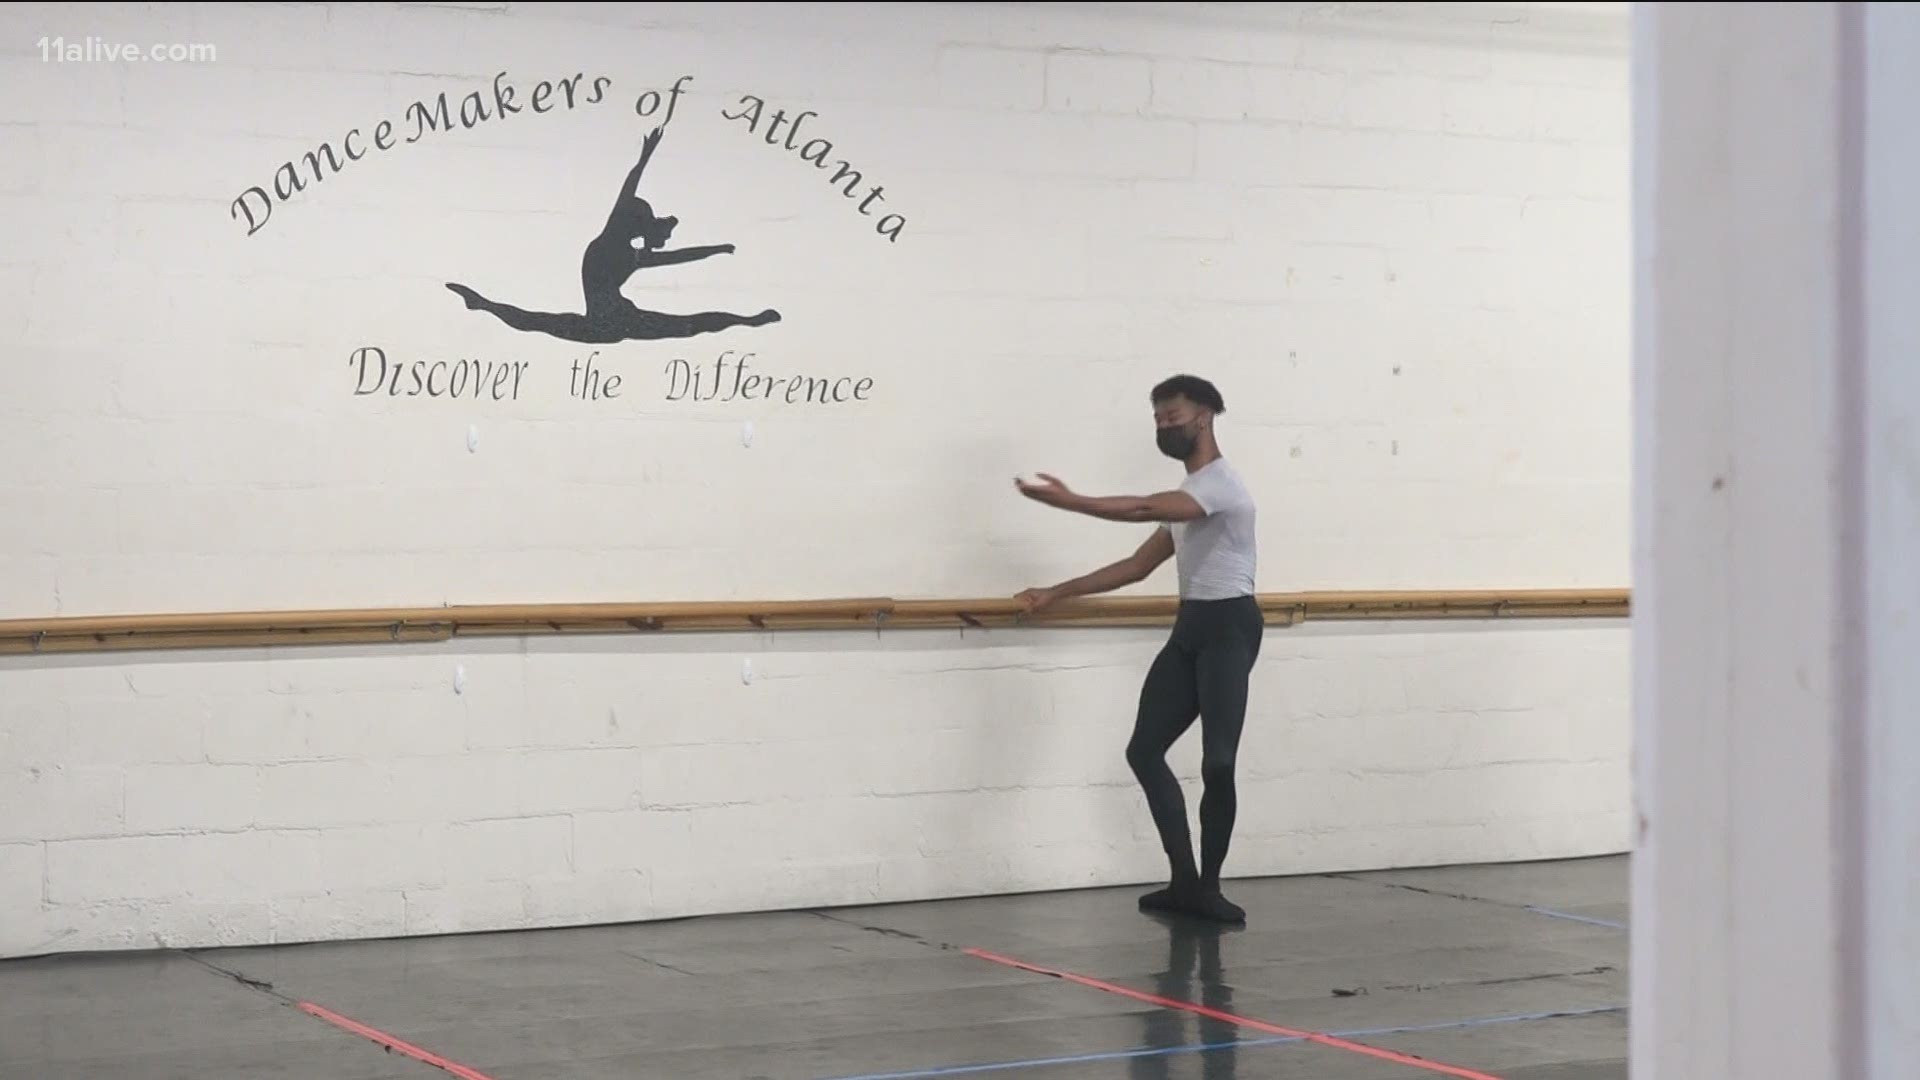 Xavier Logan has a chance to follow his dreams of dancing at the Juilliard School. But the work isn't over. He still must raise money to get there.